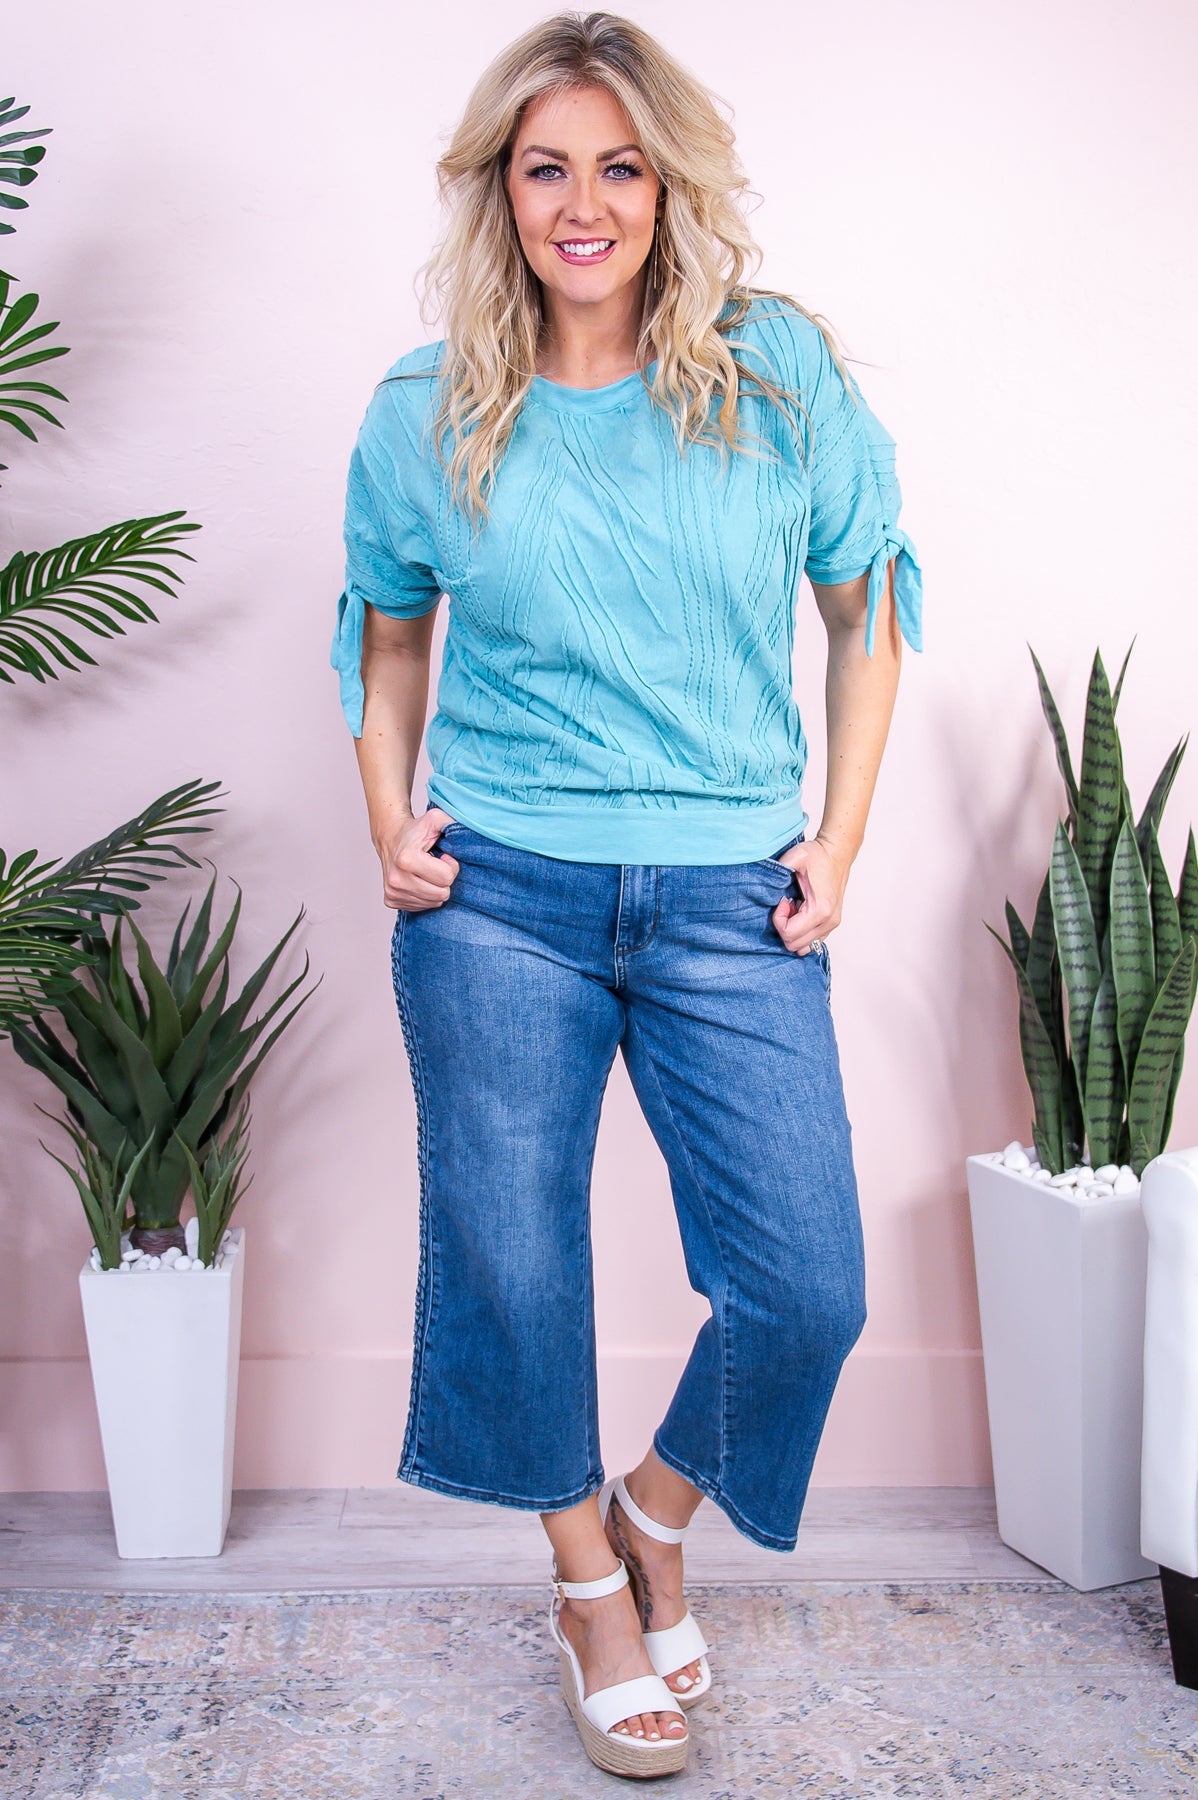 The Winds & The Waves Turquoise Solid  Striped Top - T9686TU